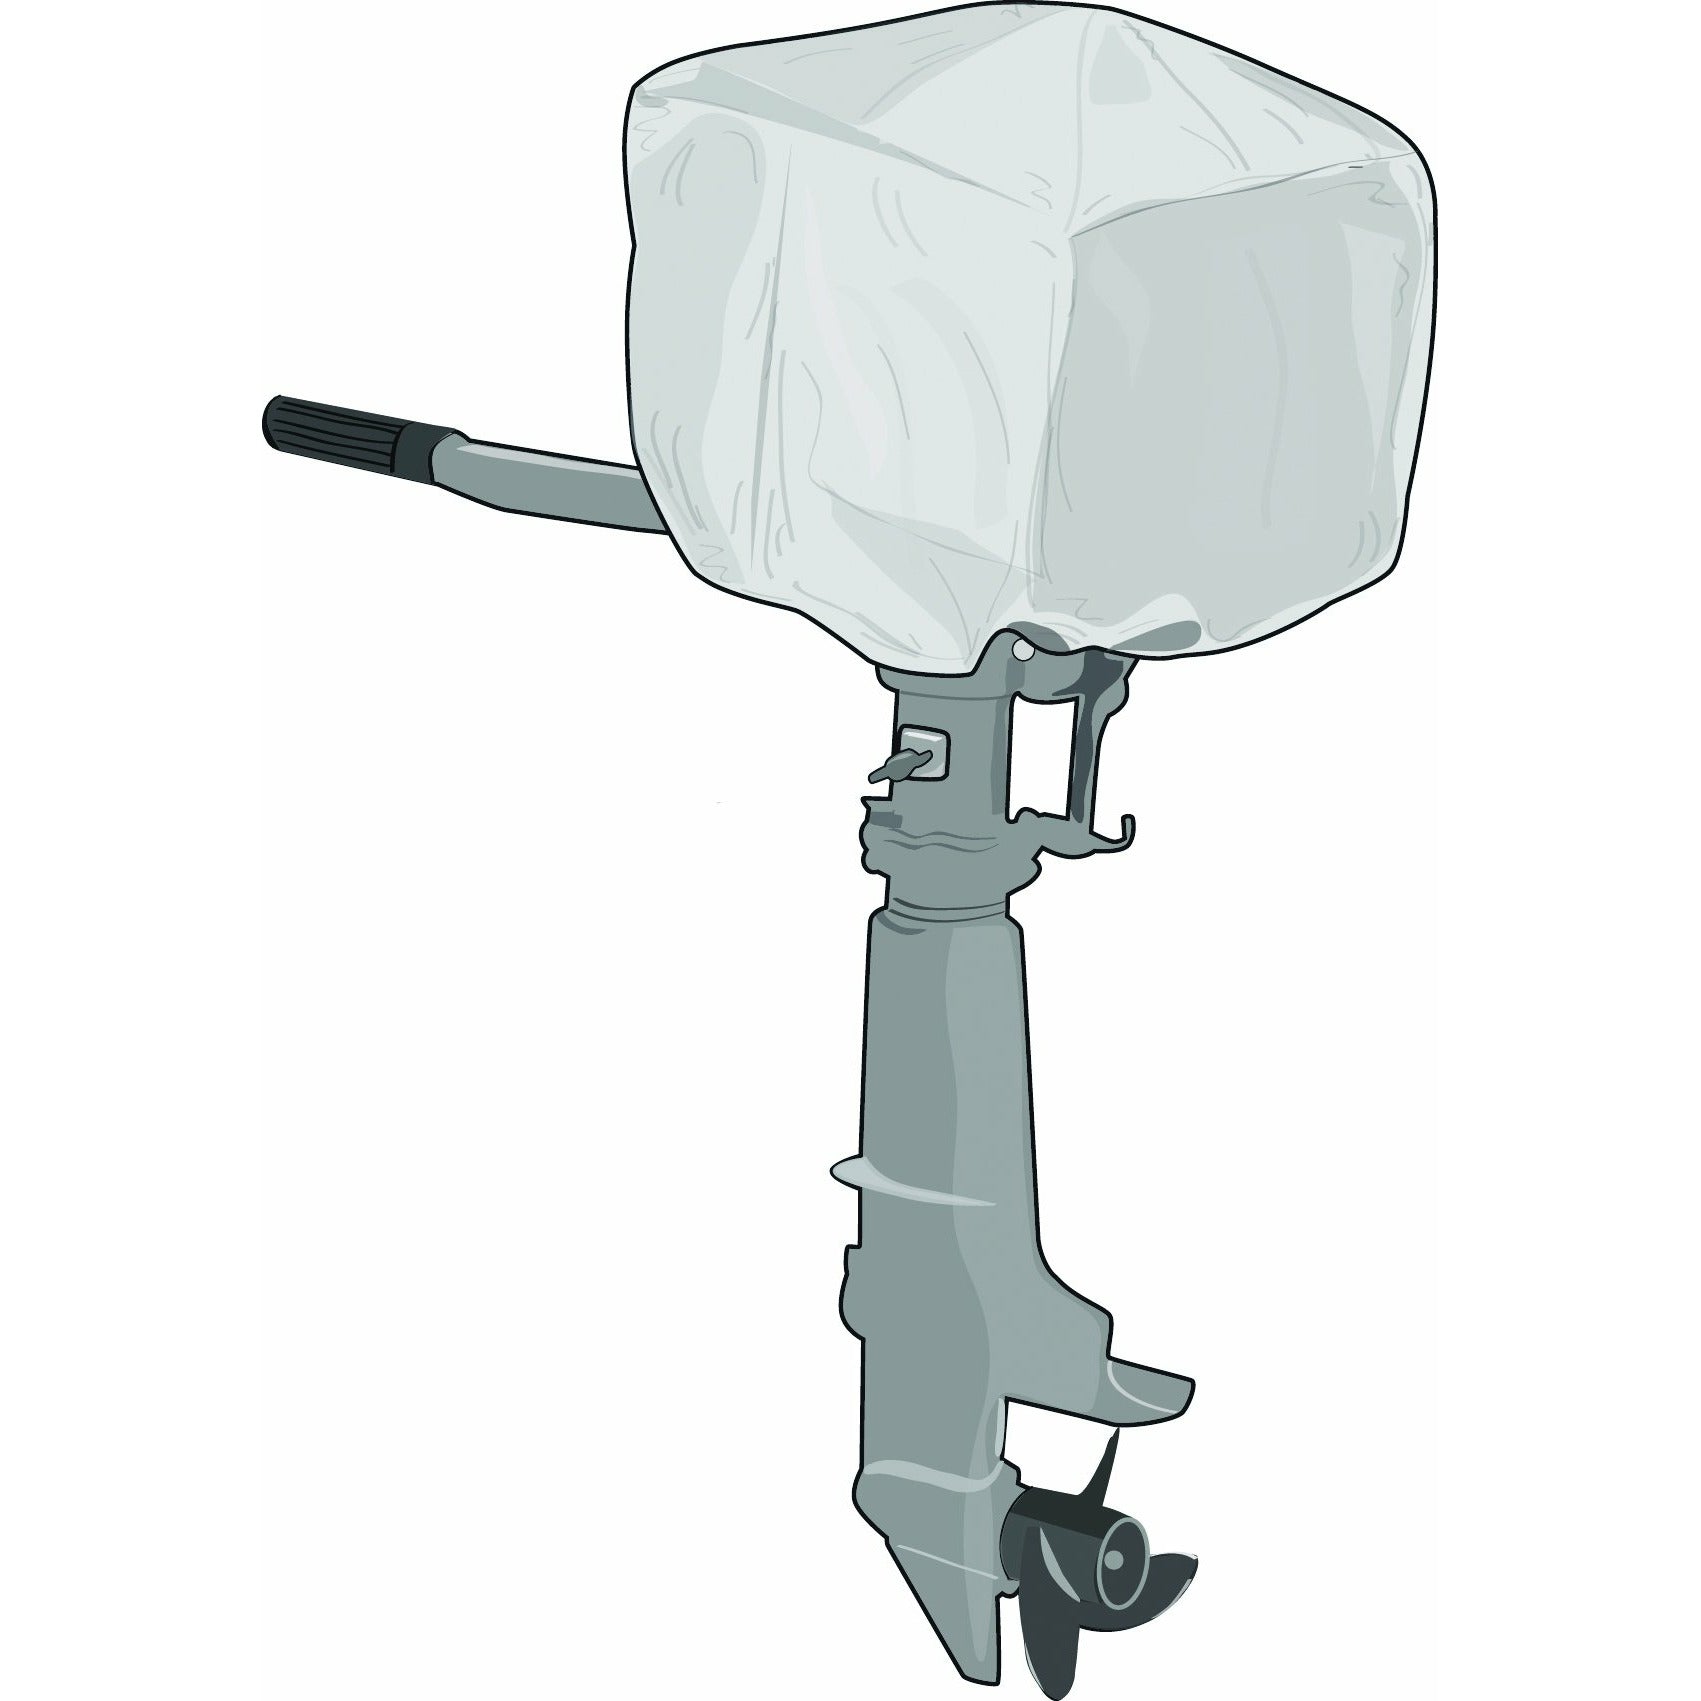 Talamex Outboard Cover Xl 81101815